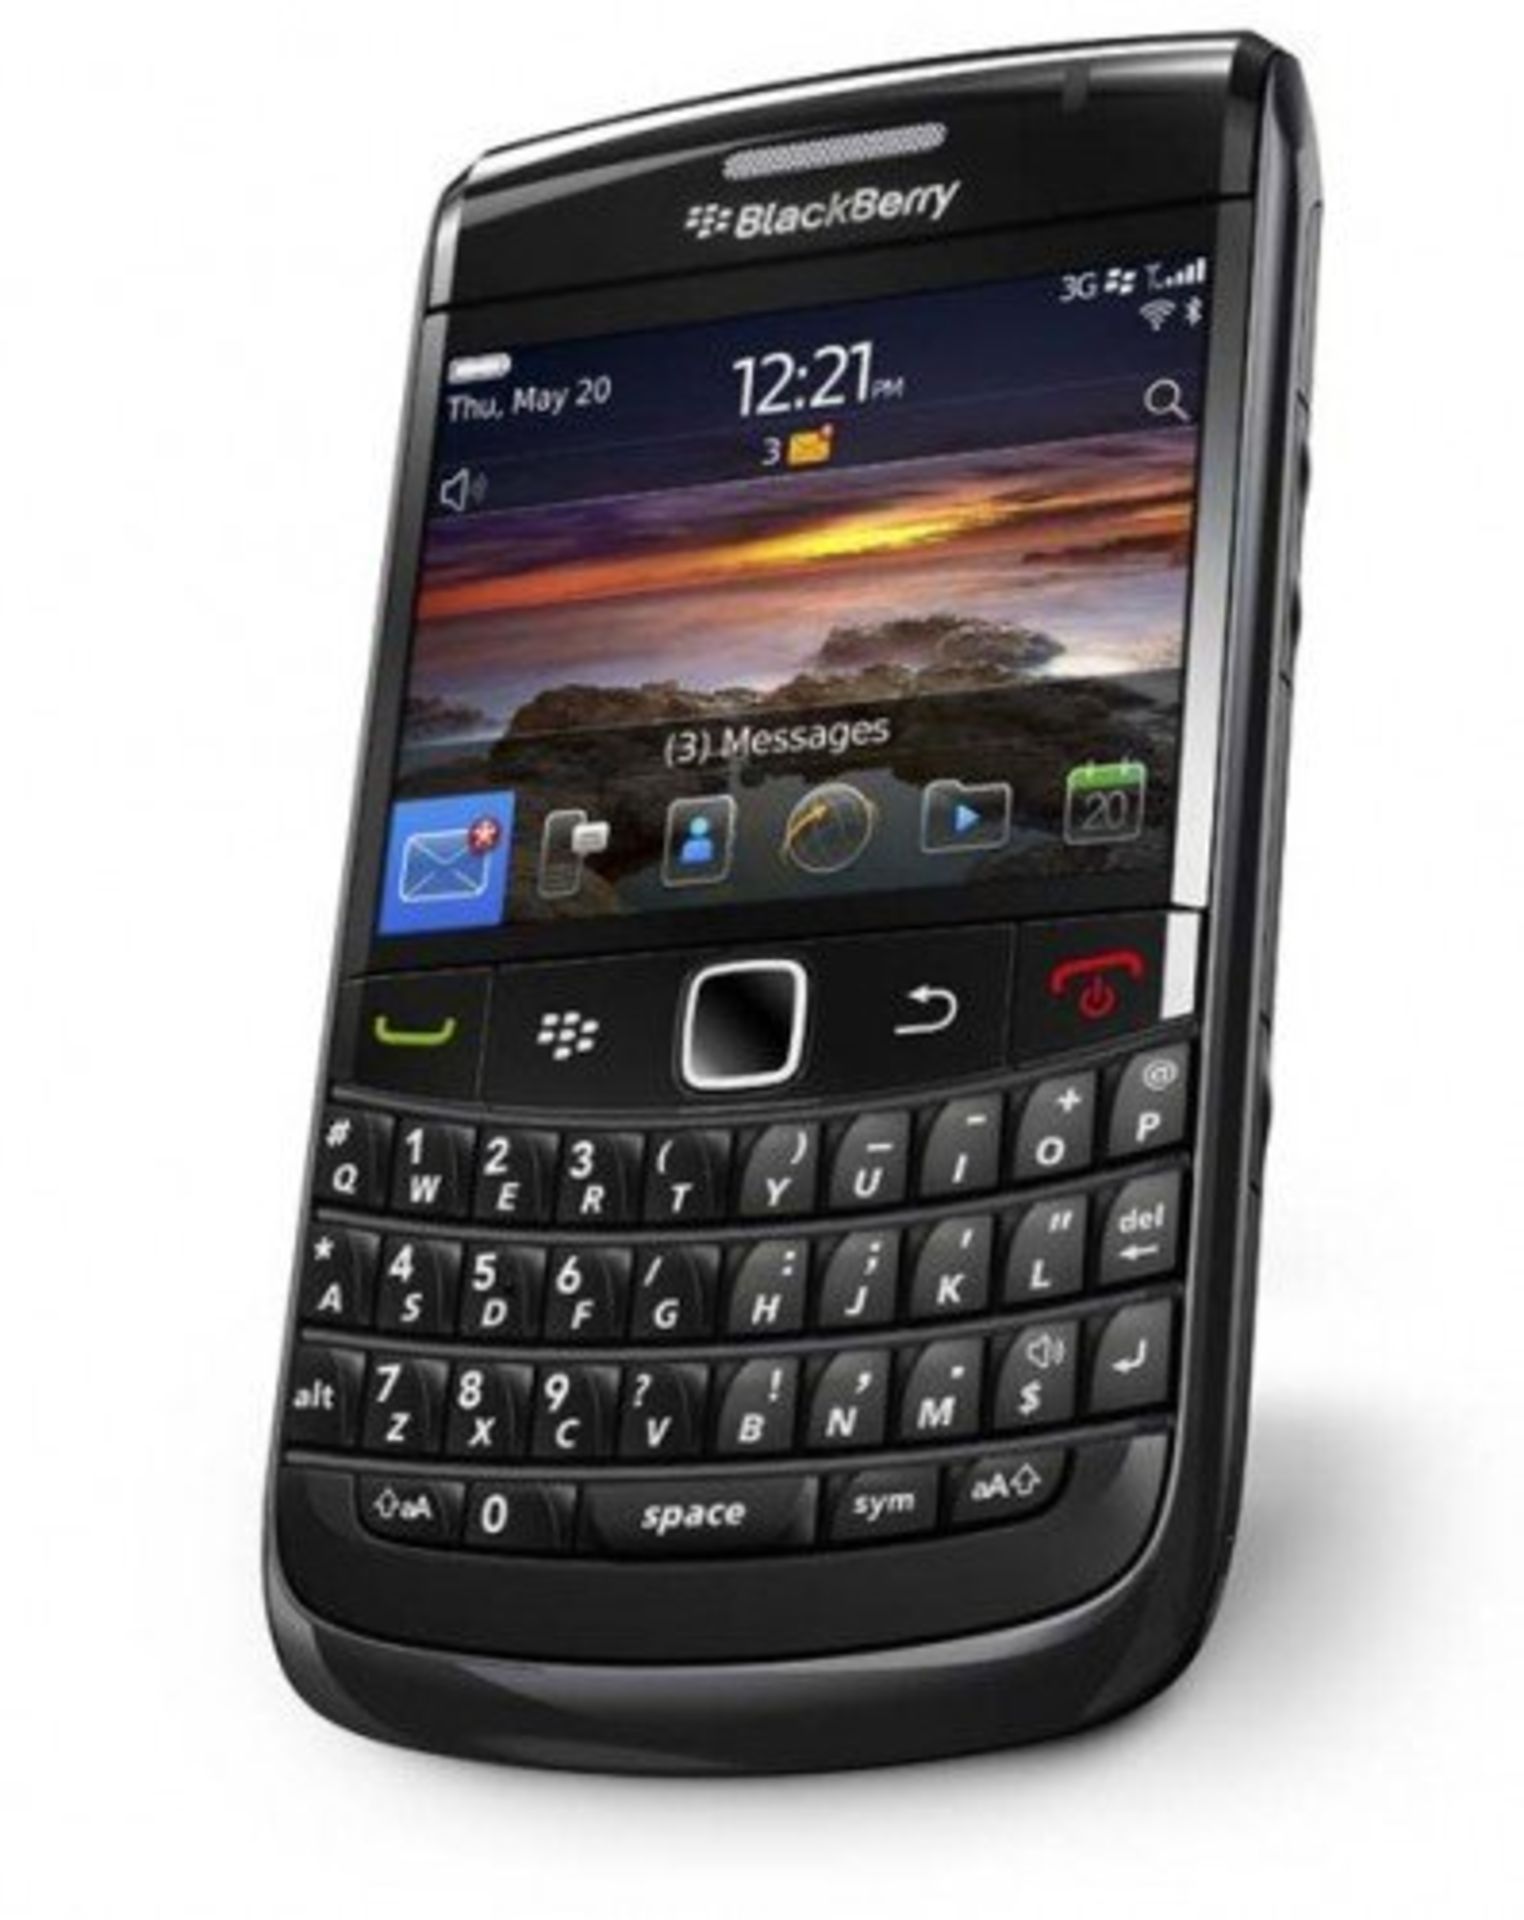 Grade A Blackberry 9780 Colours May Vary Item available approx 12 working days after sale